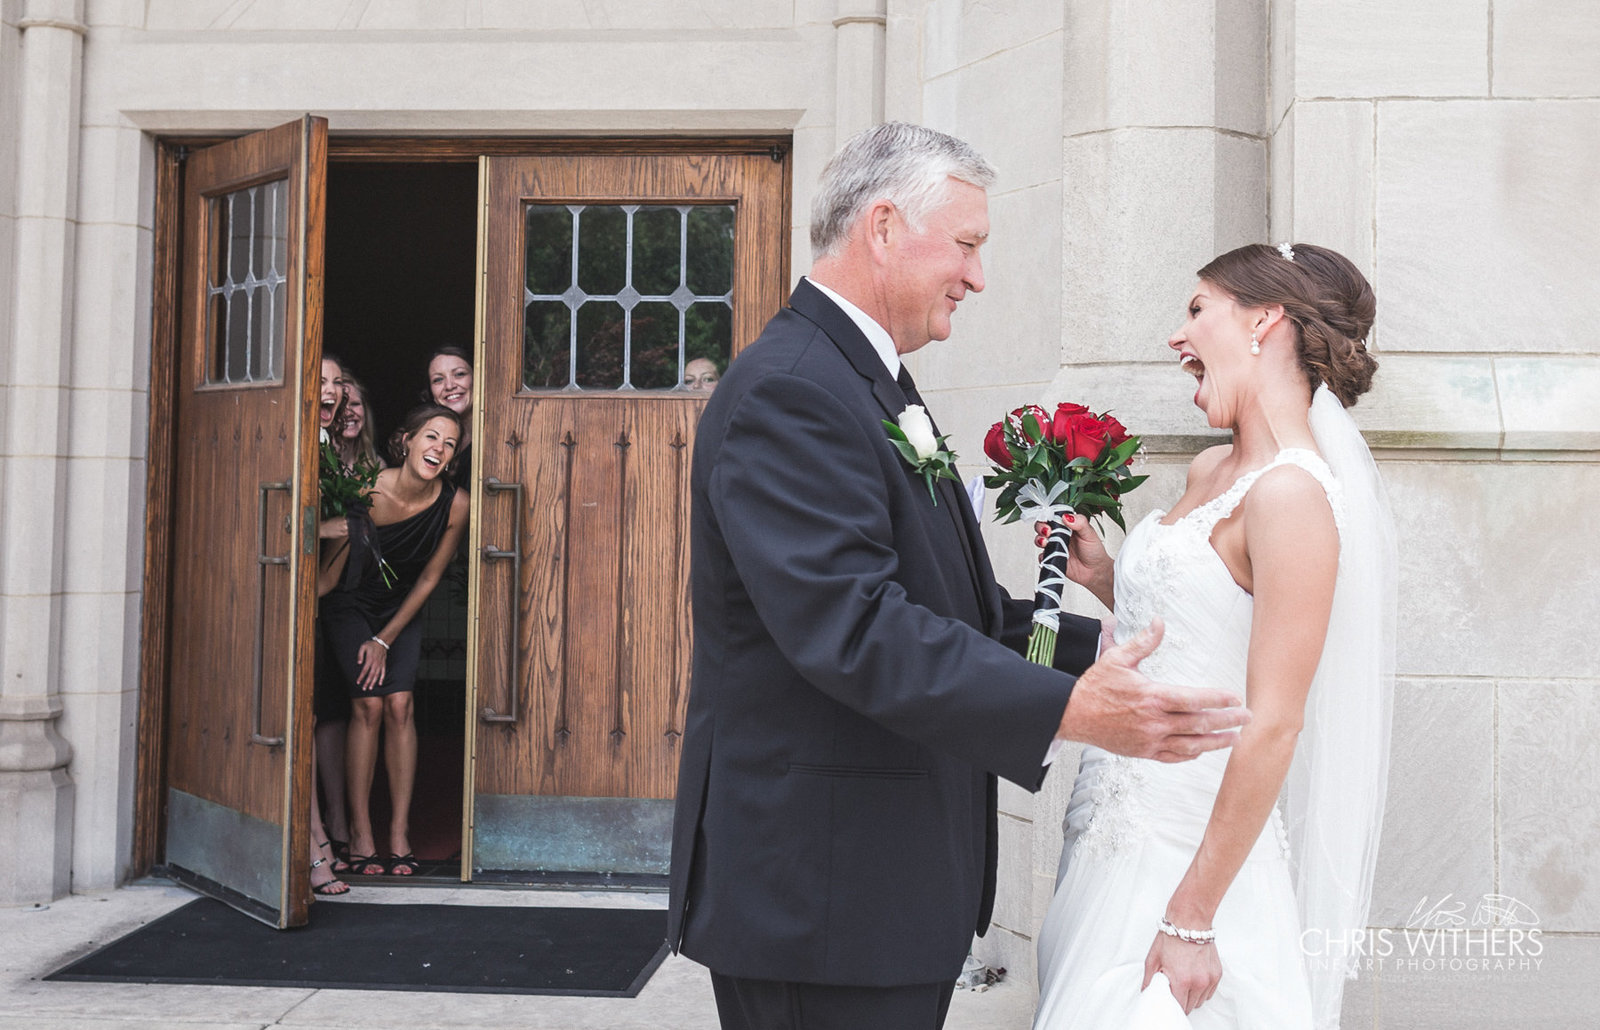 Springfield Illinois Wedding Photographer - Chris Withers Photography (14 of 16)